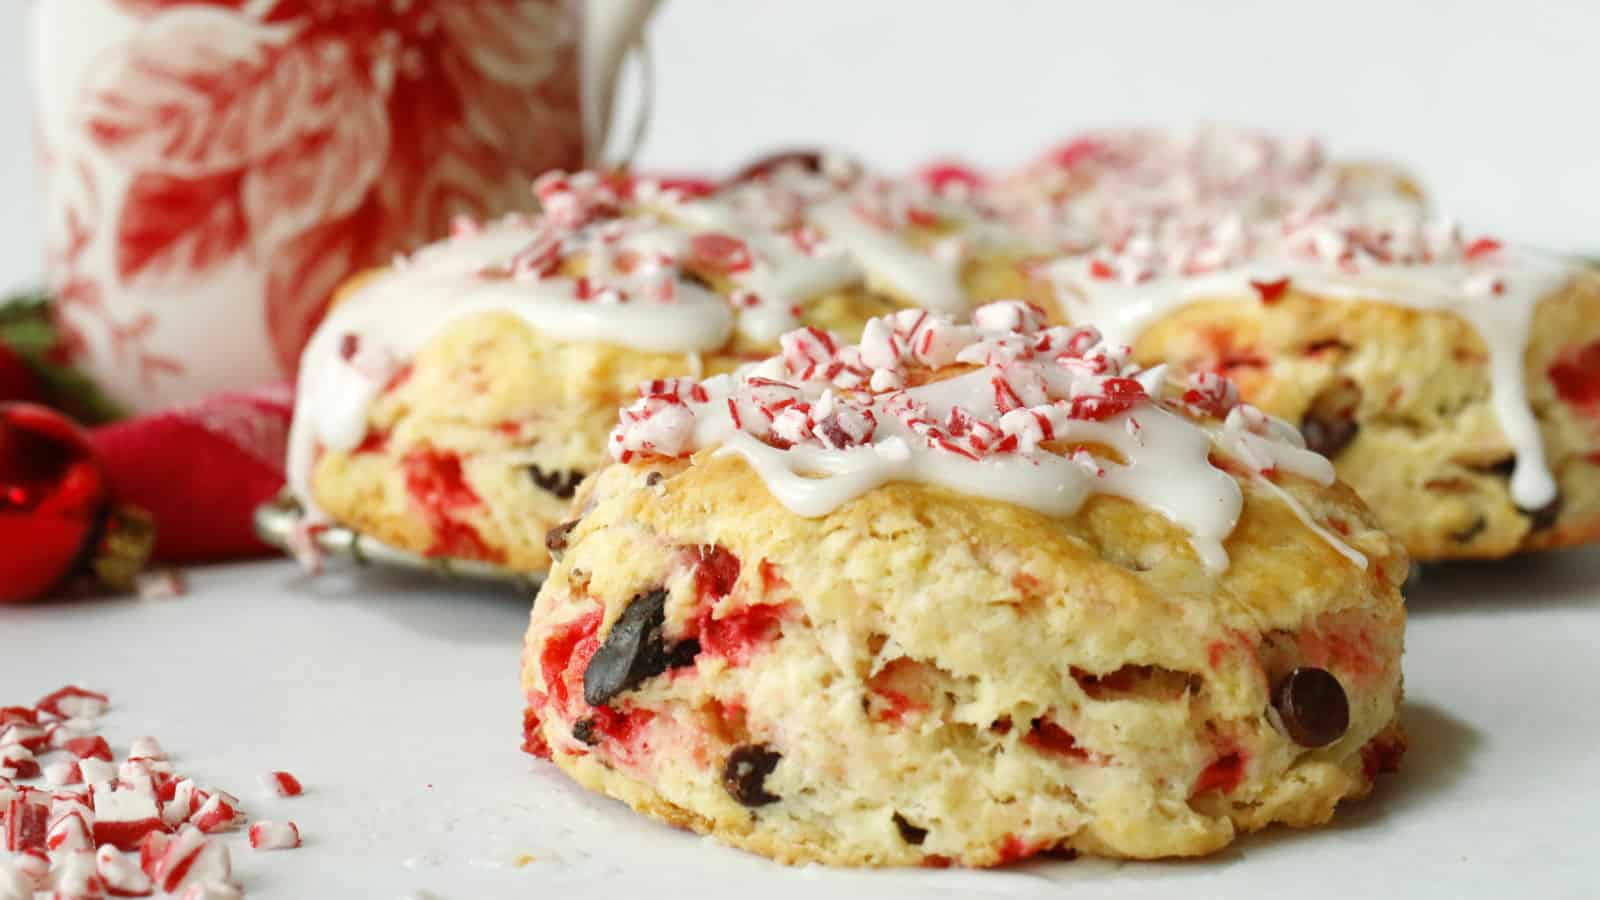 Chocolate and peppermint scones with icing and peppermint candies.